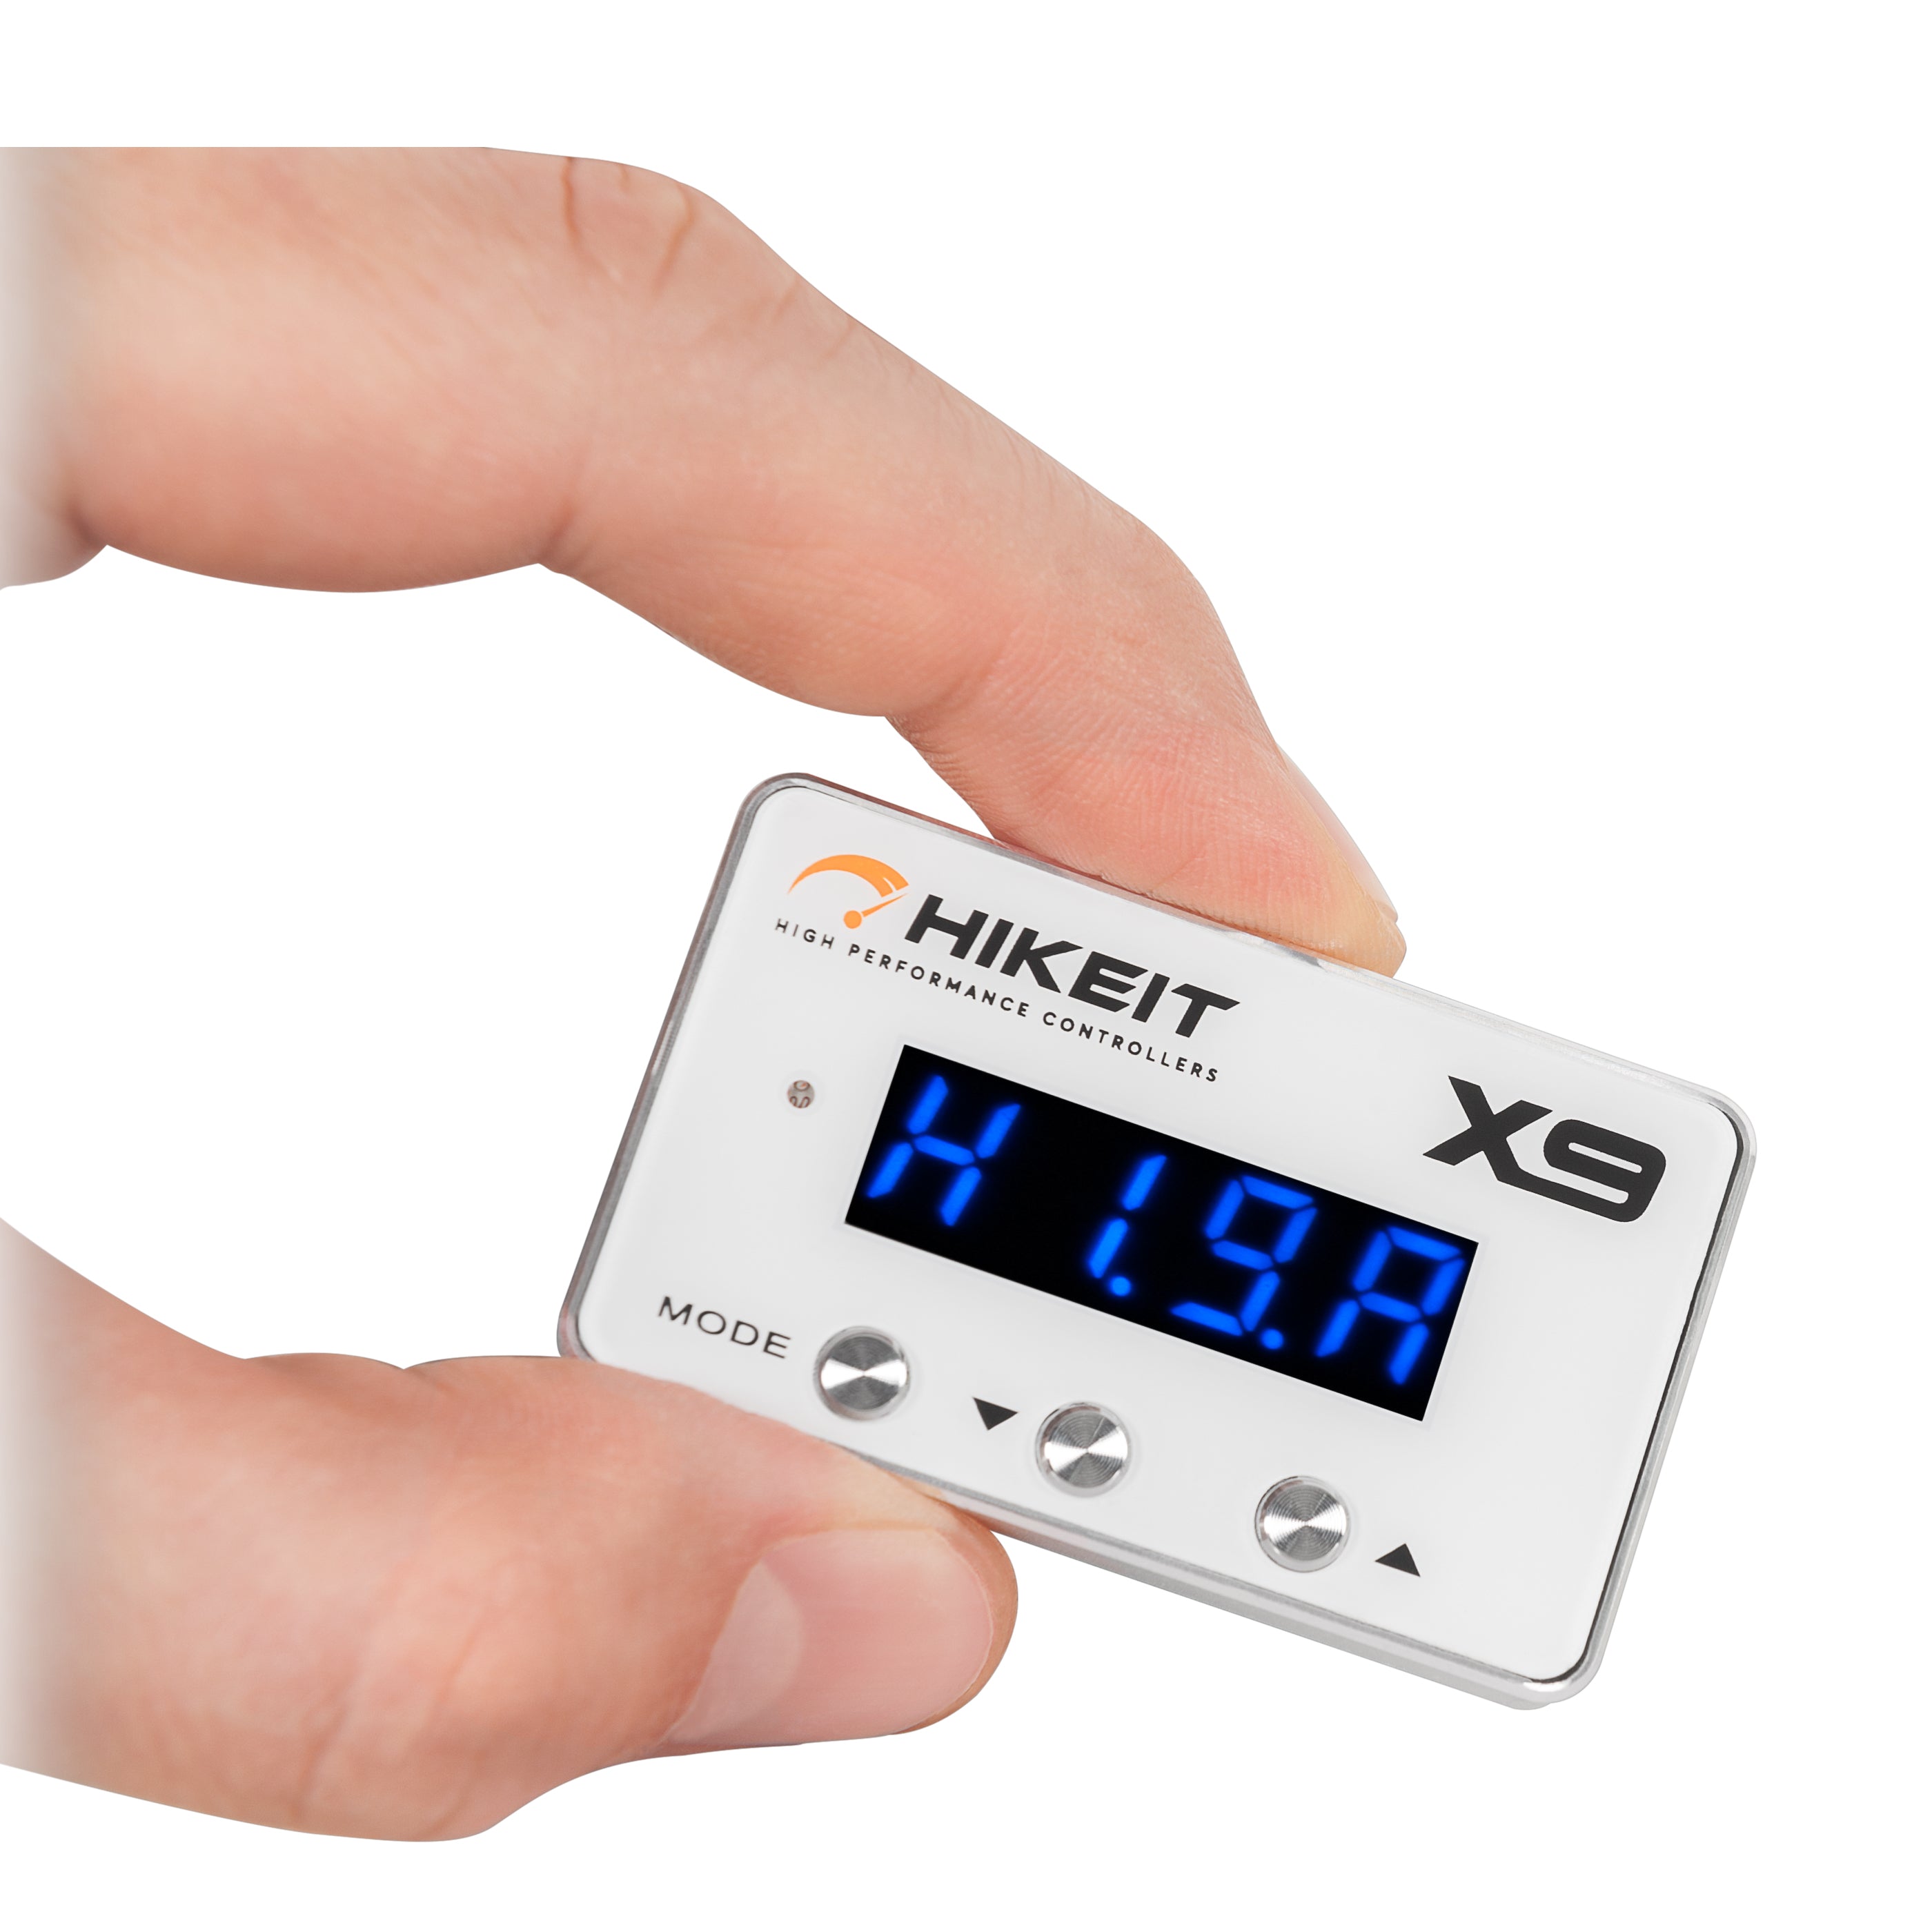 HIKEIT THROTTLE CONTROLLER FOR FIAT - REEL 'N' DEAL TACKLE